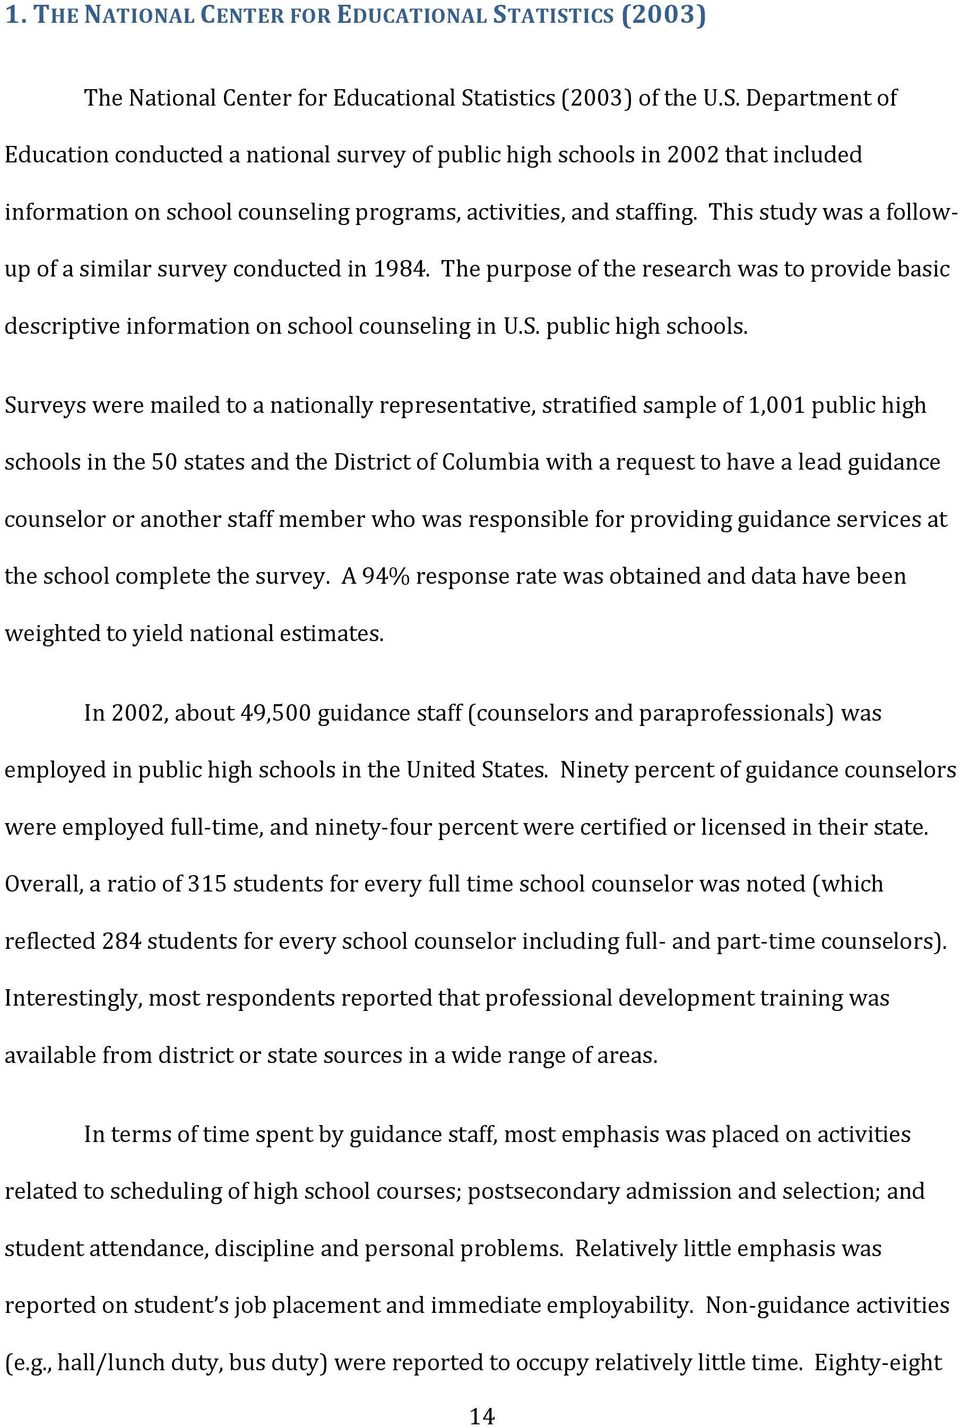 This study was a followup of a similar survey conducted in 1984. The purpose of the research was to provide basic descriptive information on school counseling in U.S. public high schools.